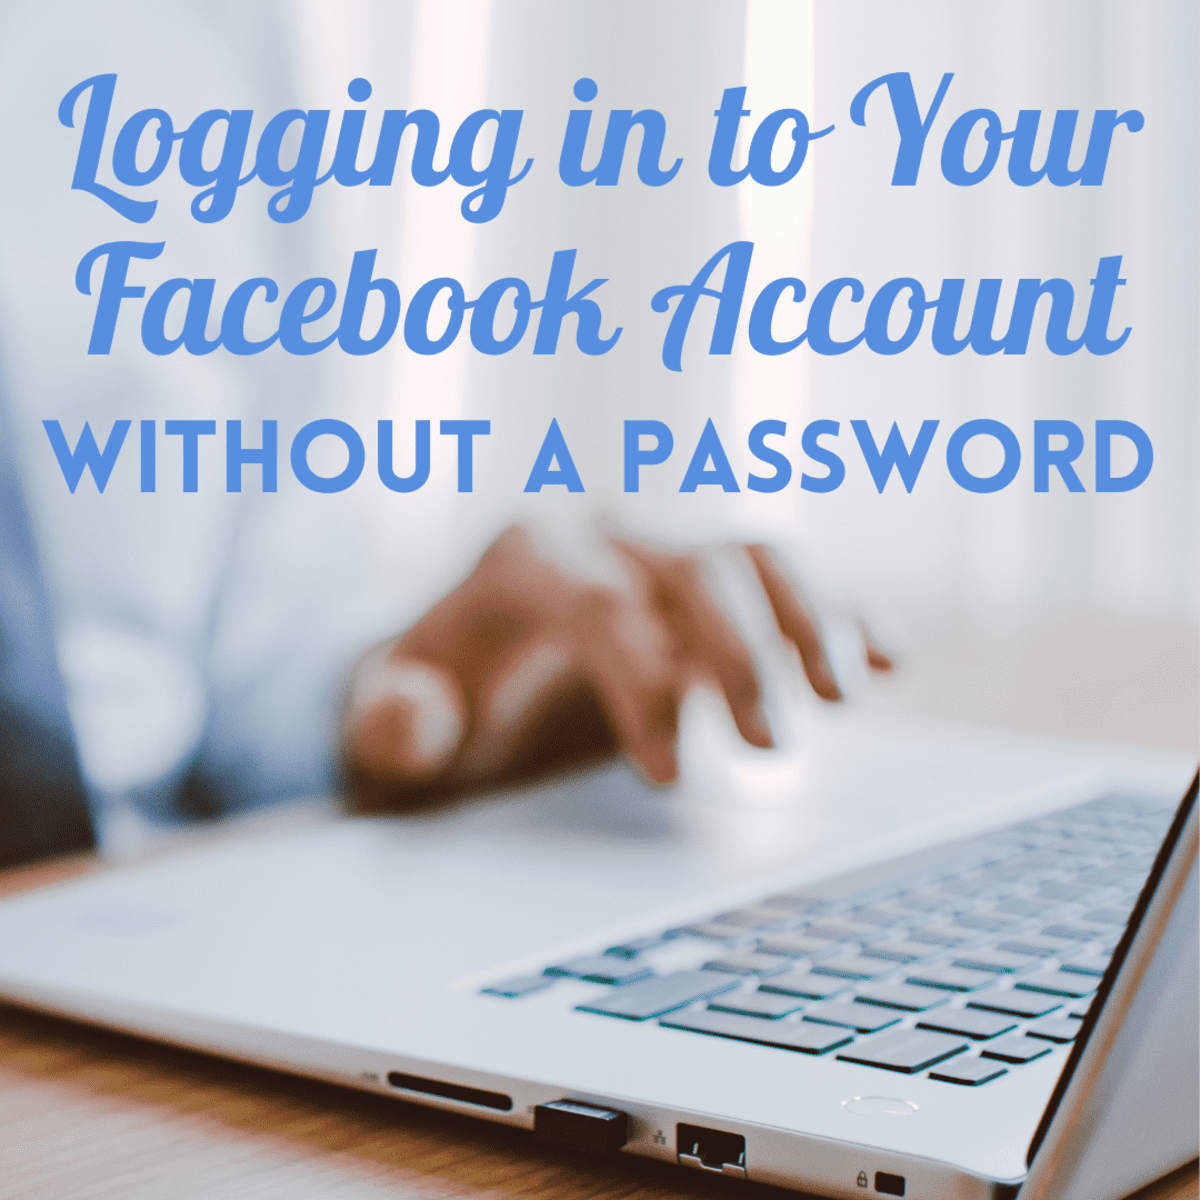 Facebook login: Forgot your password? How to log into Facebook and